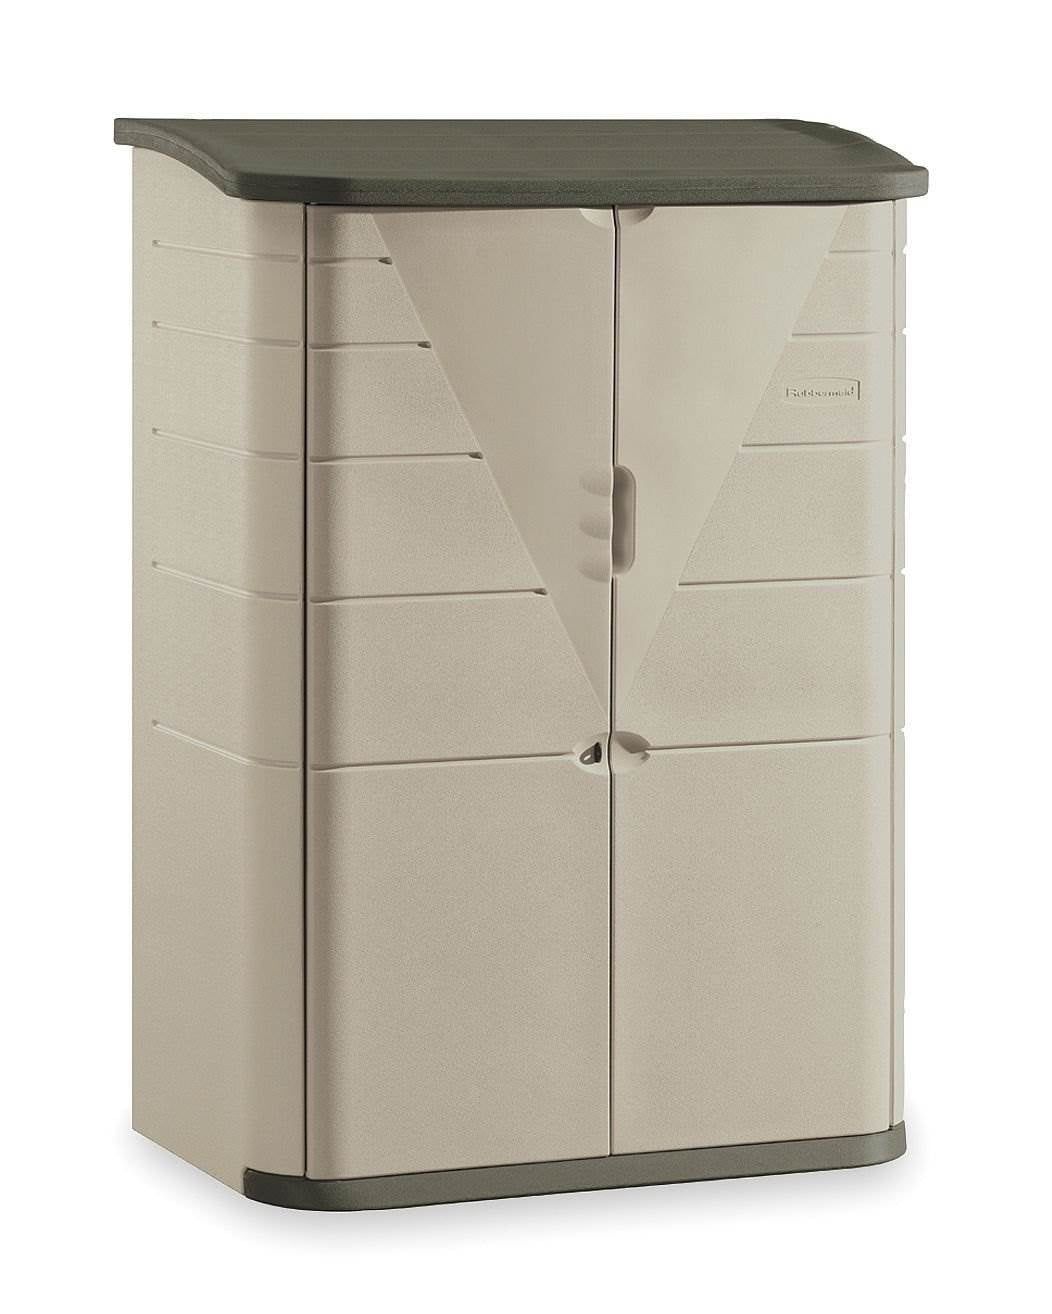 Rubbermaid Horizontal Outdoor Storage Shed, 55 x 28 x 36, 20 cu. ft ...